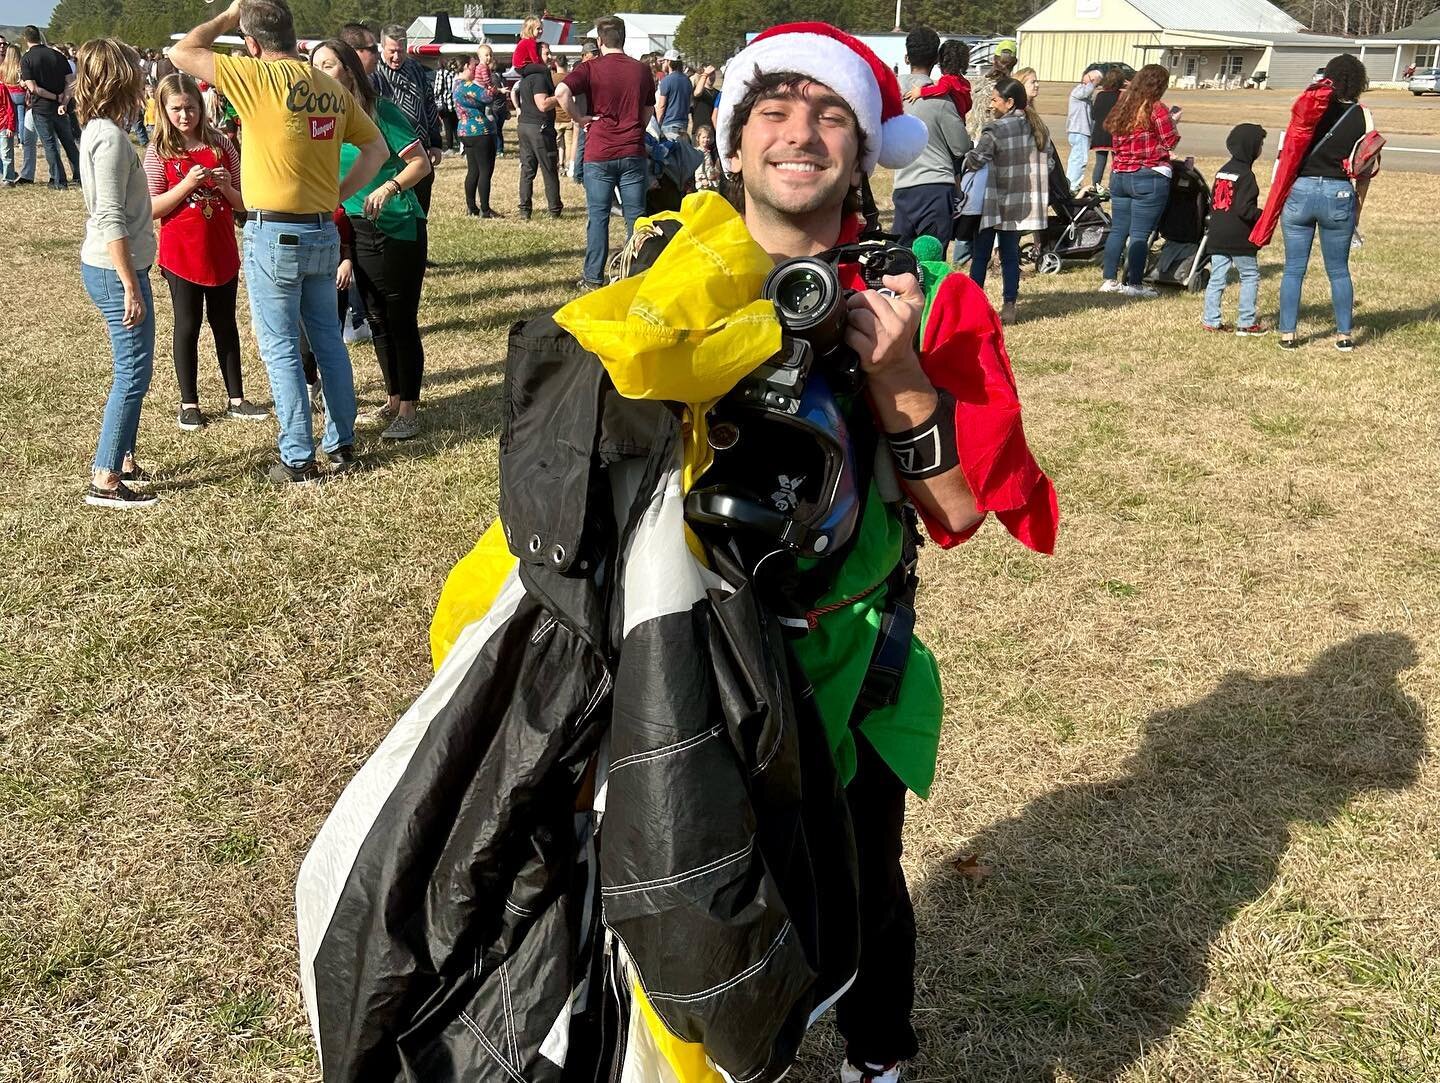 When you live near the #82ndairbornedivision, it seems every community event entails jumping out of aircraft. Even Santa and his elves can&rsquo;t visit us normally. 😆🎅🛫🫡
Cute event today with sky diving elves and Santa in a plane at the local BB